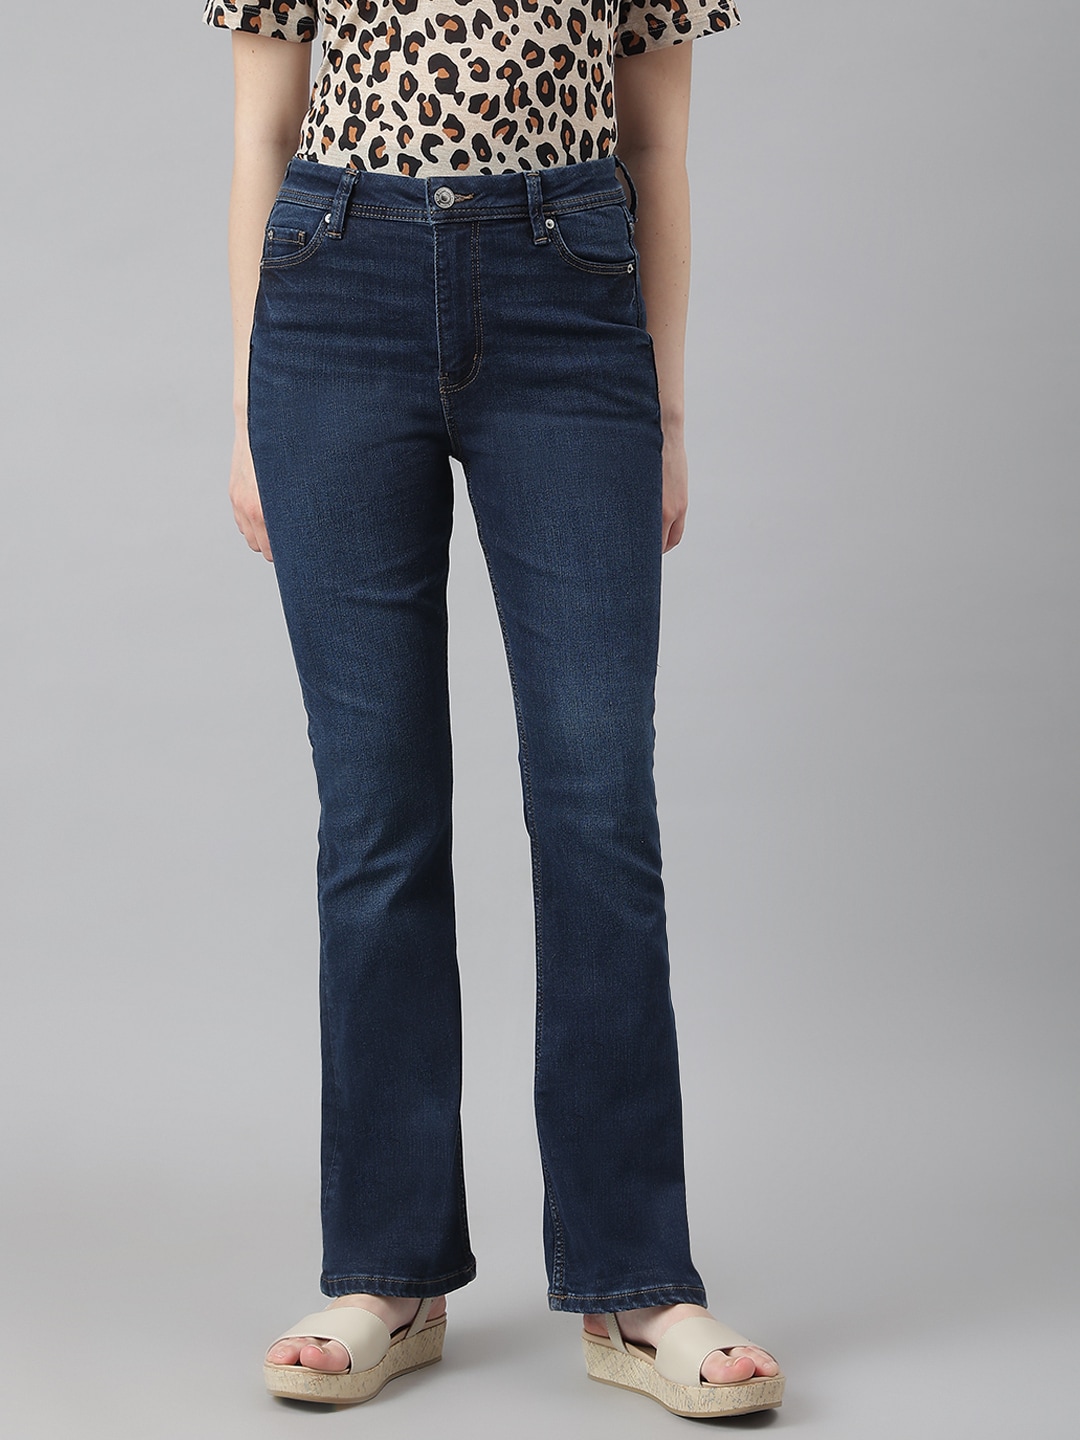 Marks & Spencer Women Navy Blue Straight Fit Light Fade Jeans Price in India